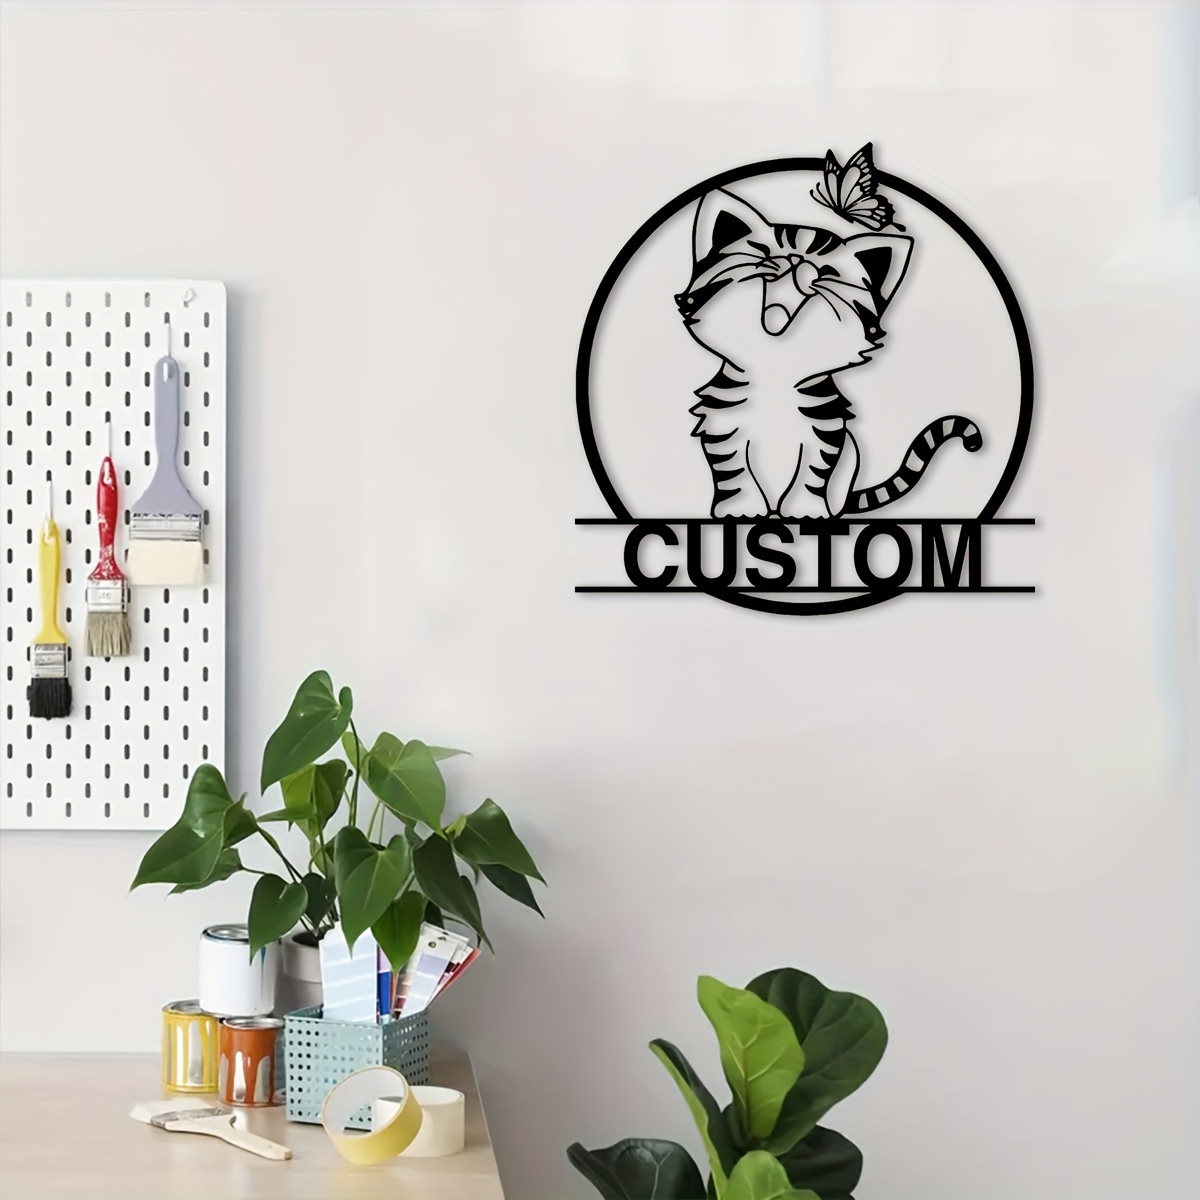 

Custom Metal Wall Sign - Personalized Family Name, Rustic Home Decor, Indoor/outdoor Use, Perfect Gift For Him Or Her, Cute Kitten Design